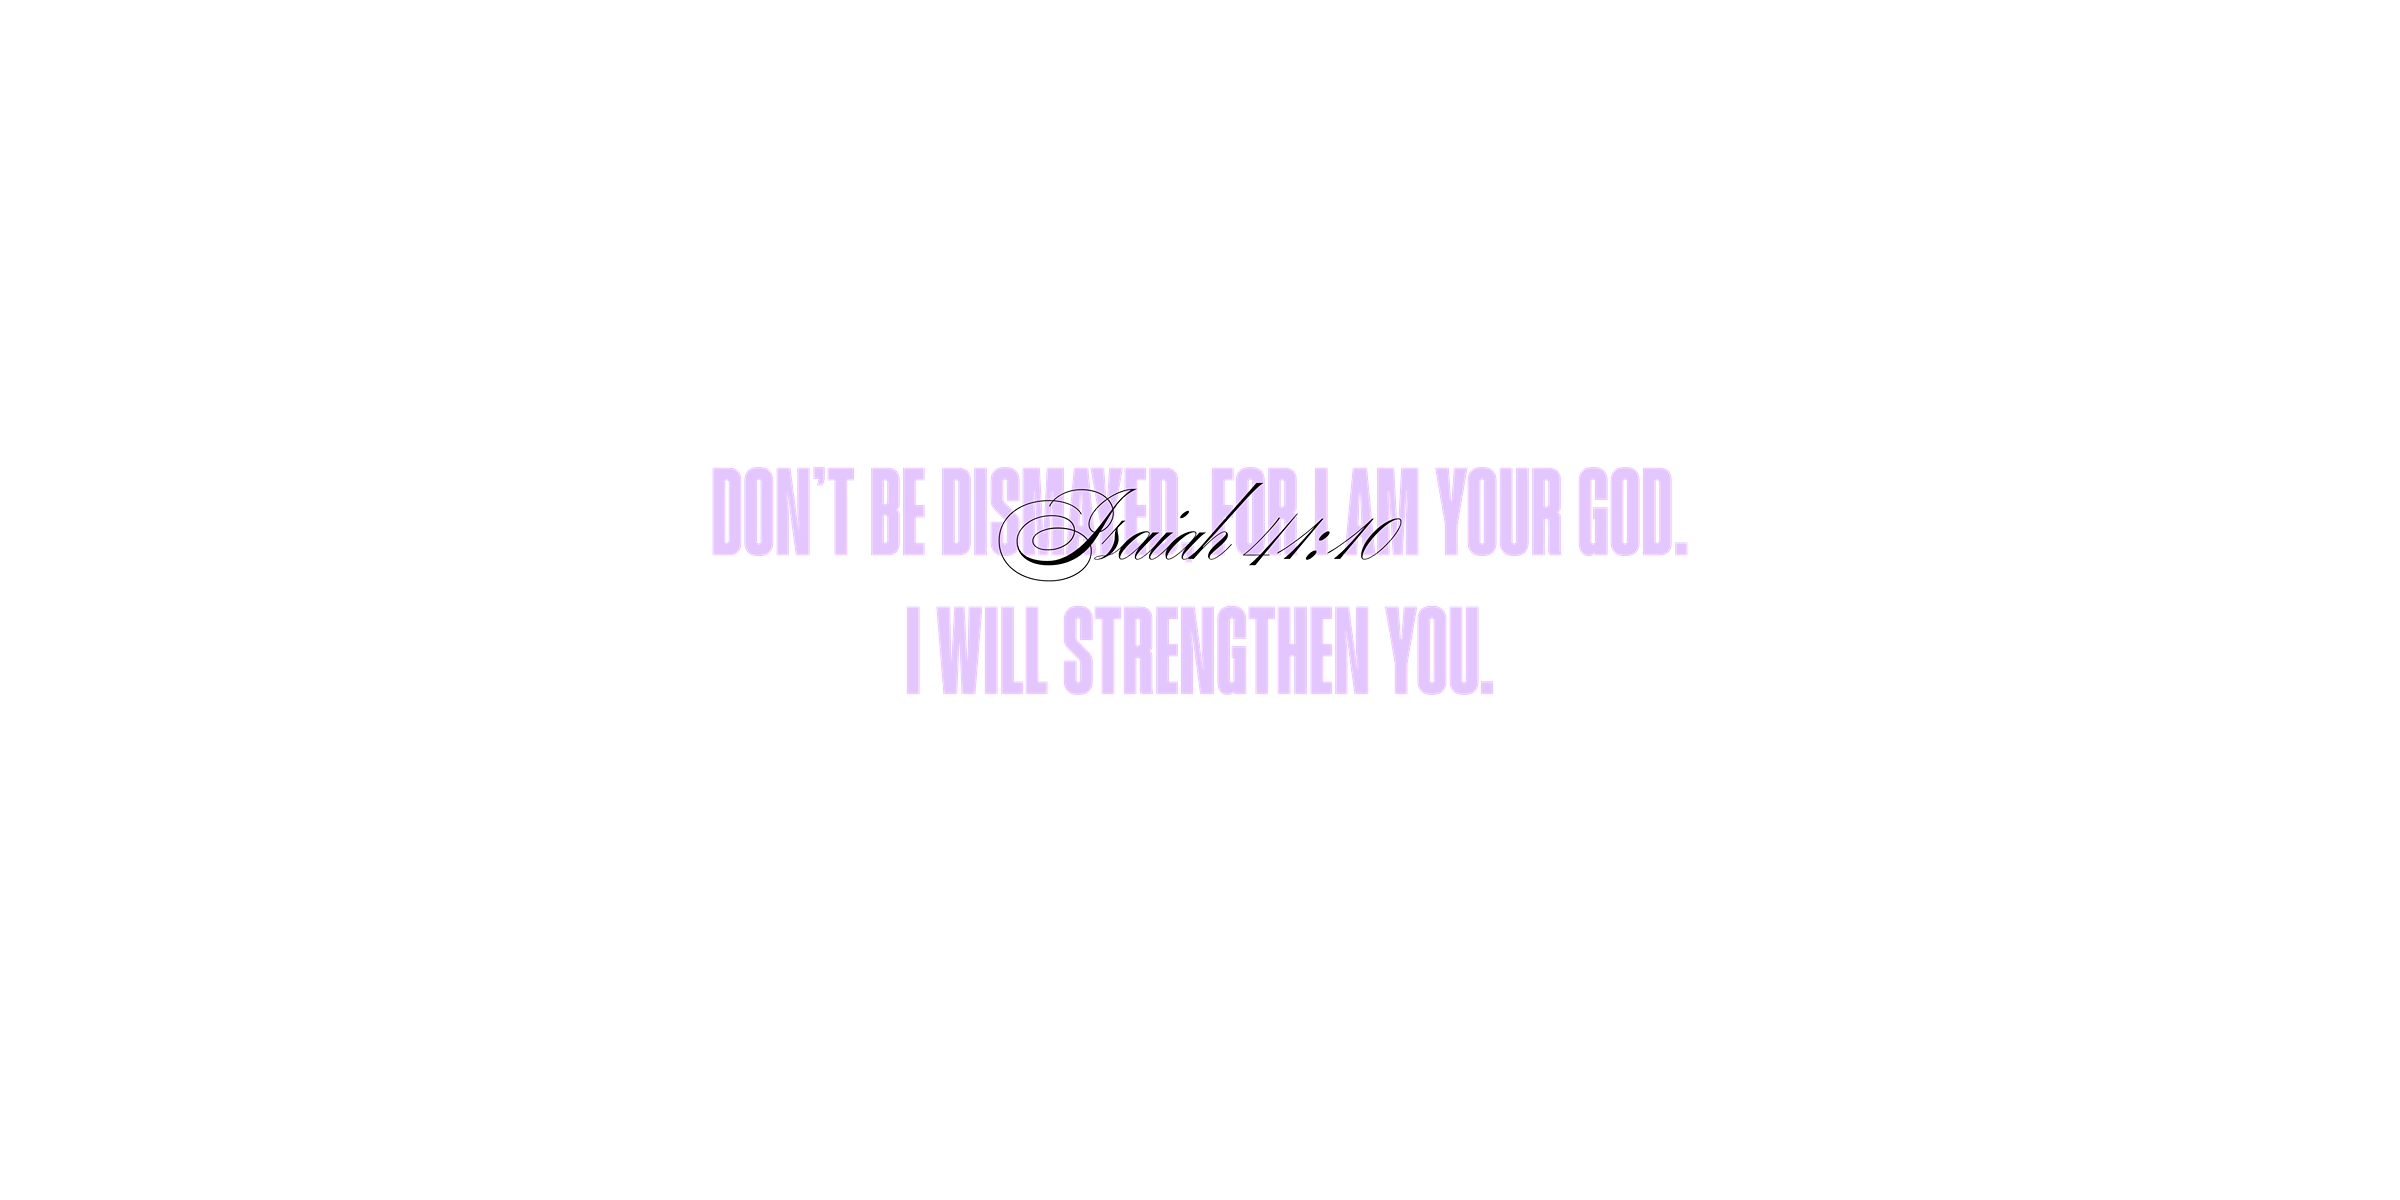 Isaiah 41:10 - God will strengthen you